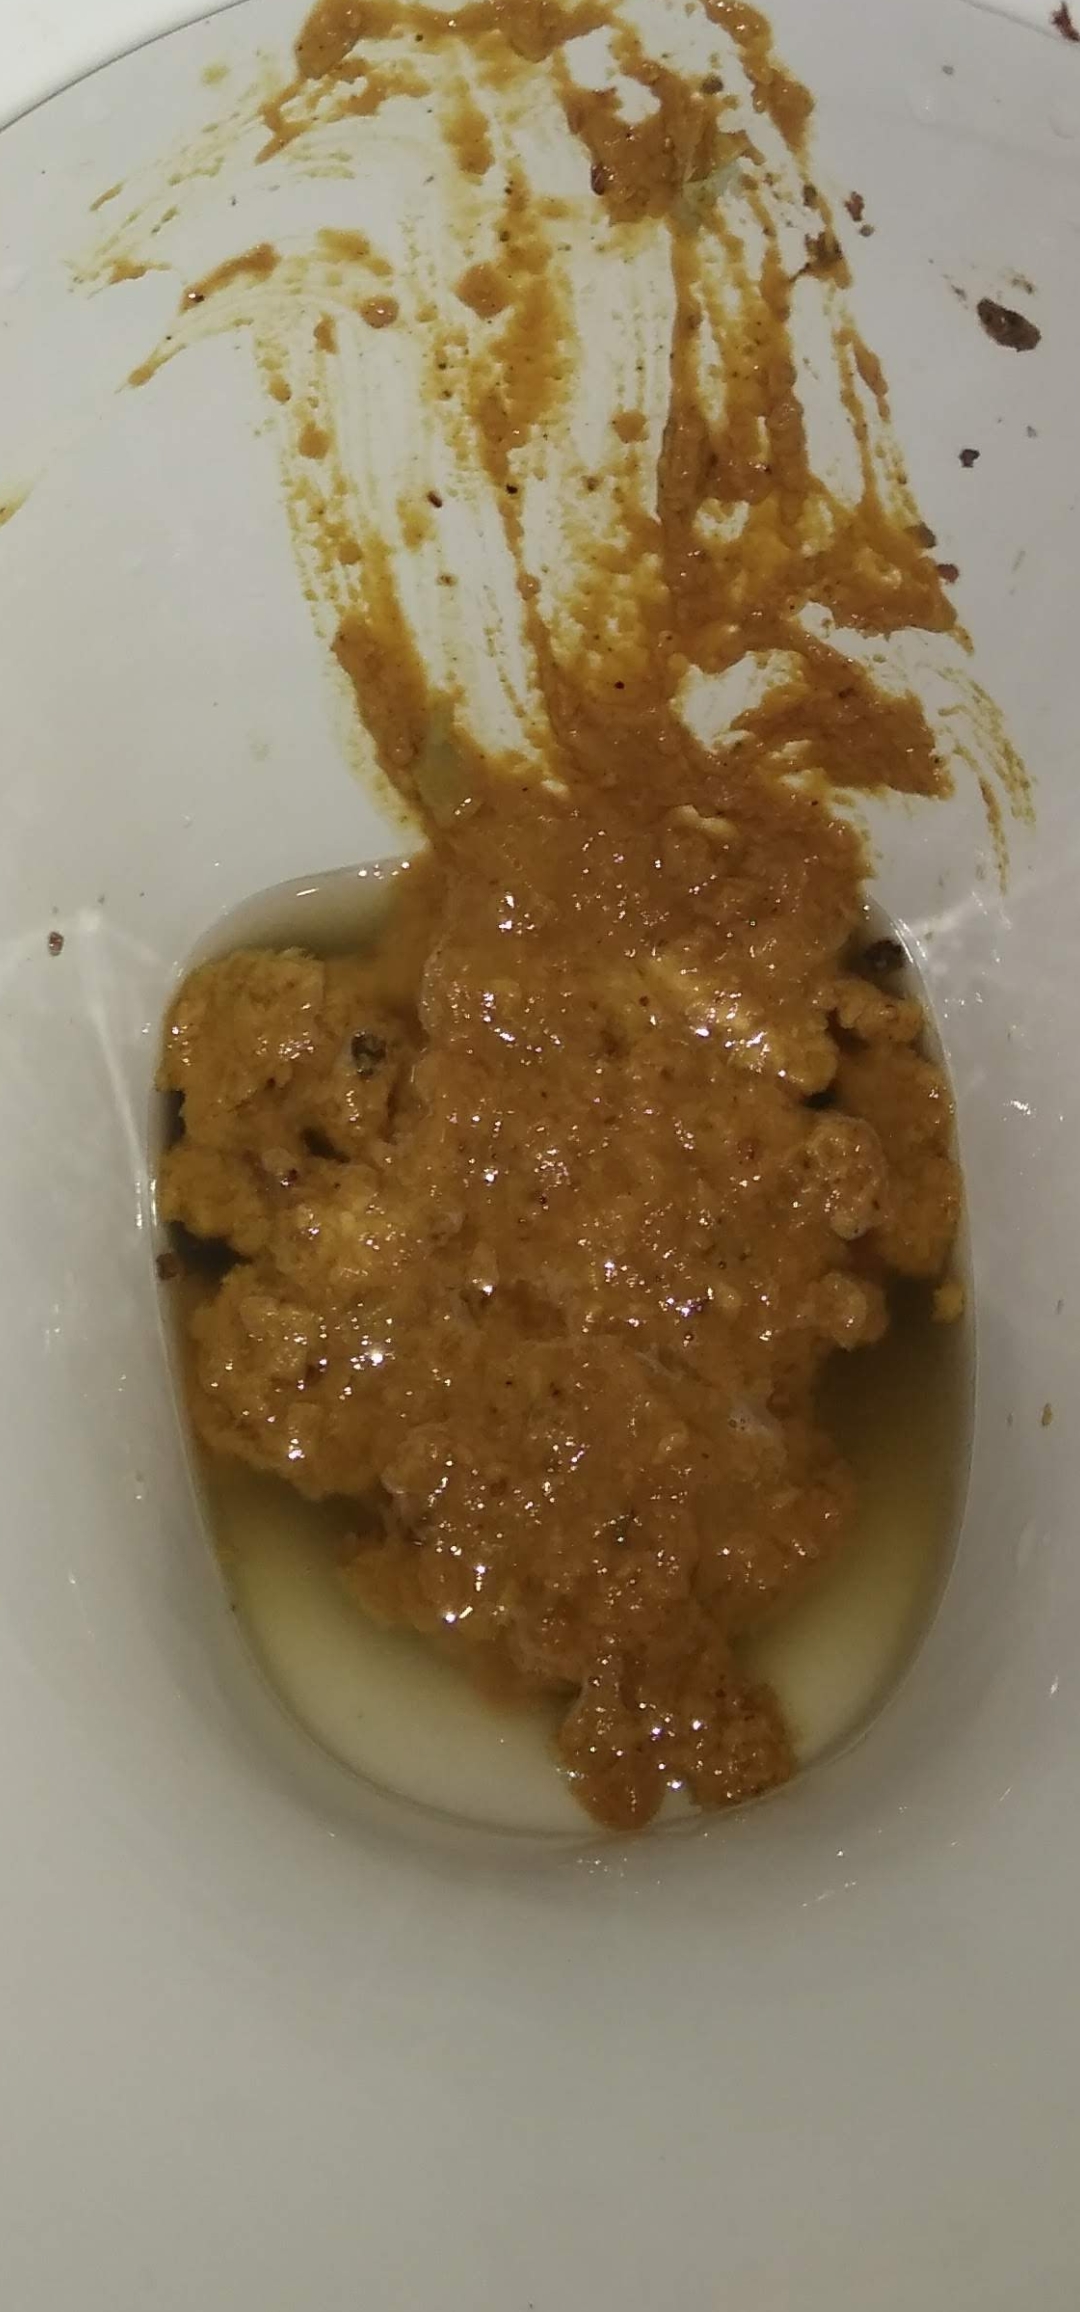 Desperate hungover shit on my mates loo this morning